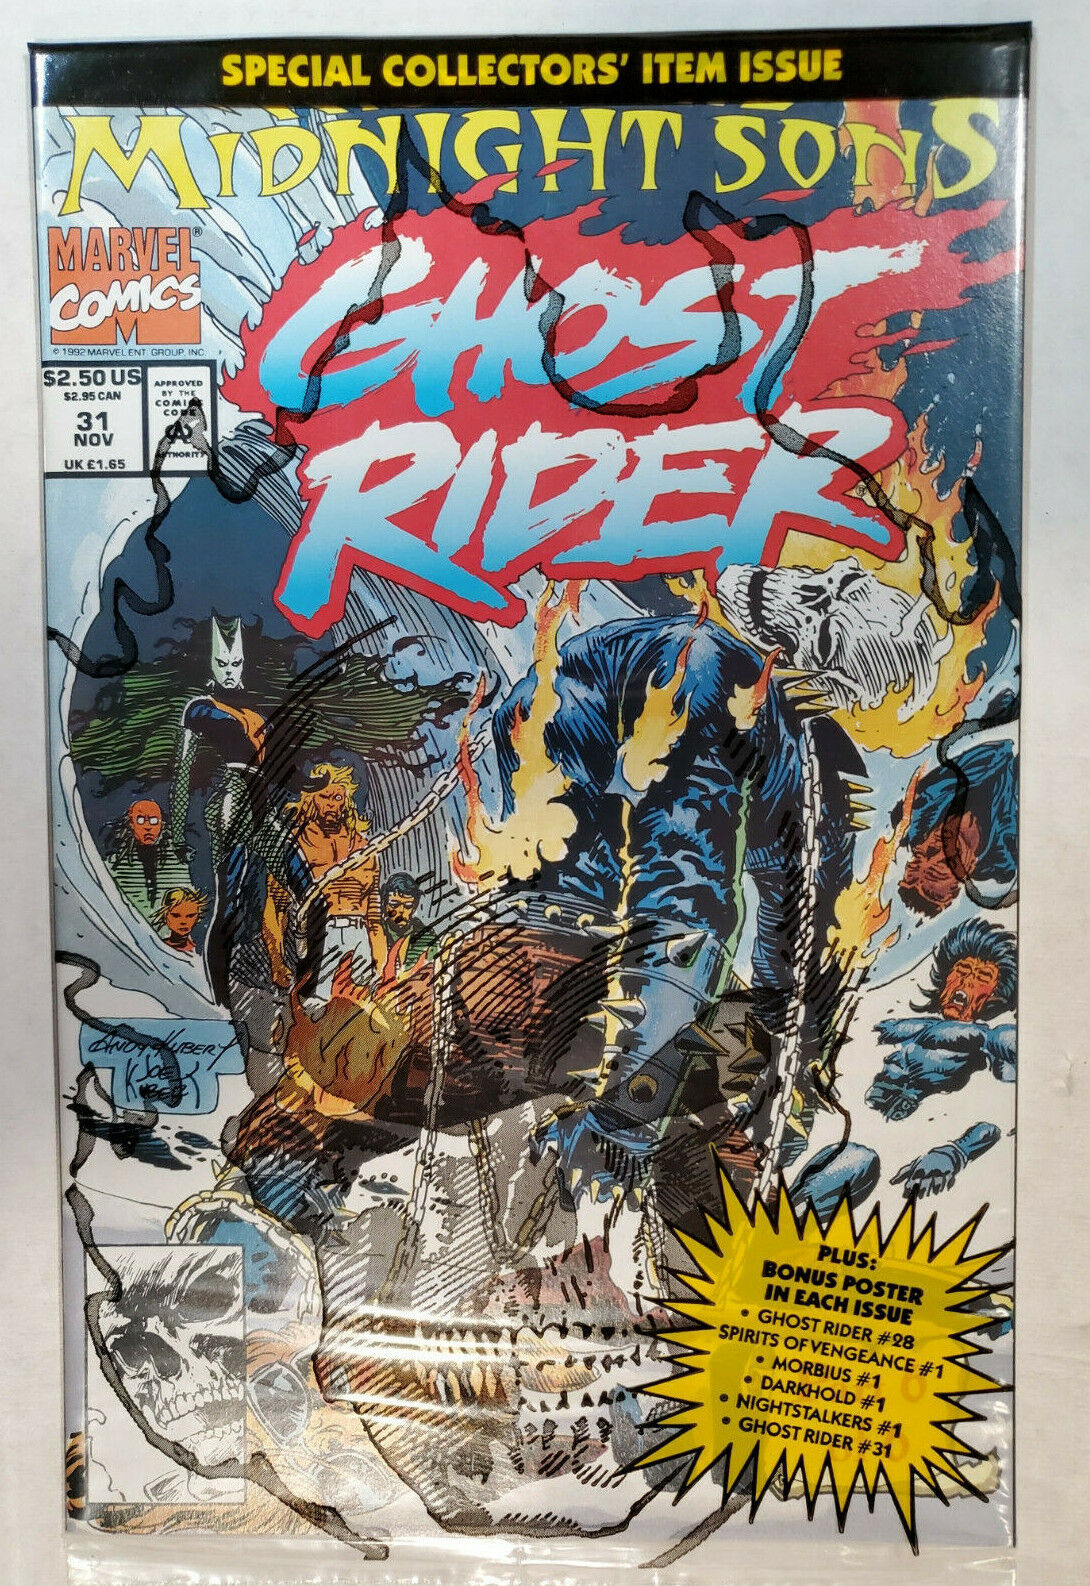 GHOST RIDER #31 Rise of the Midnight Sons